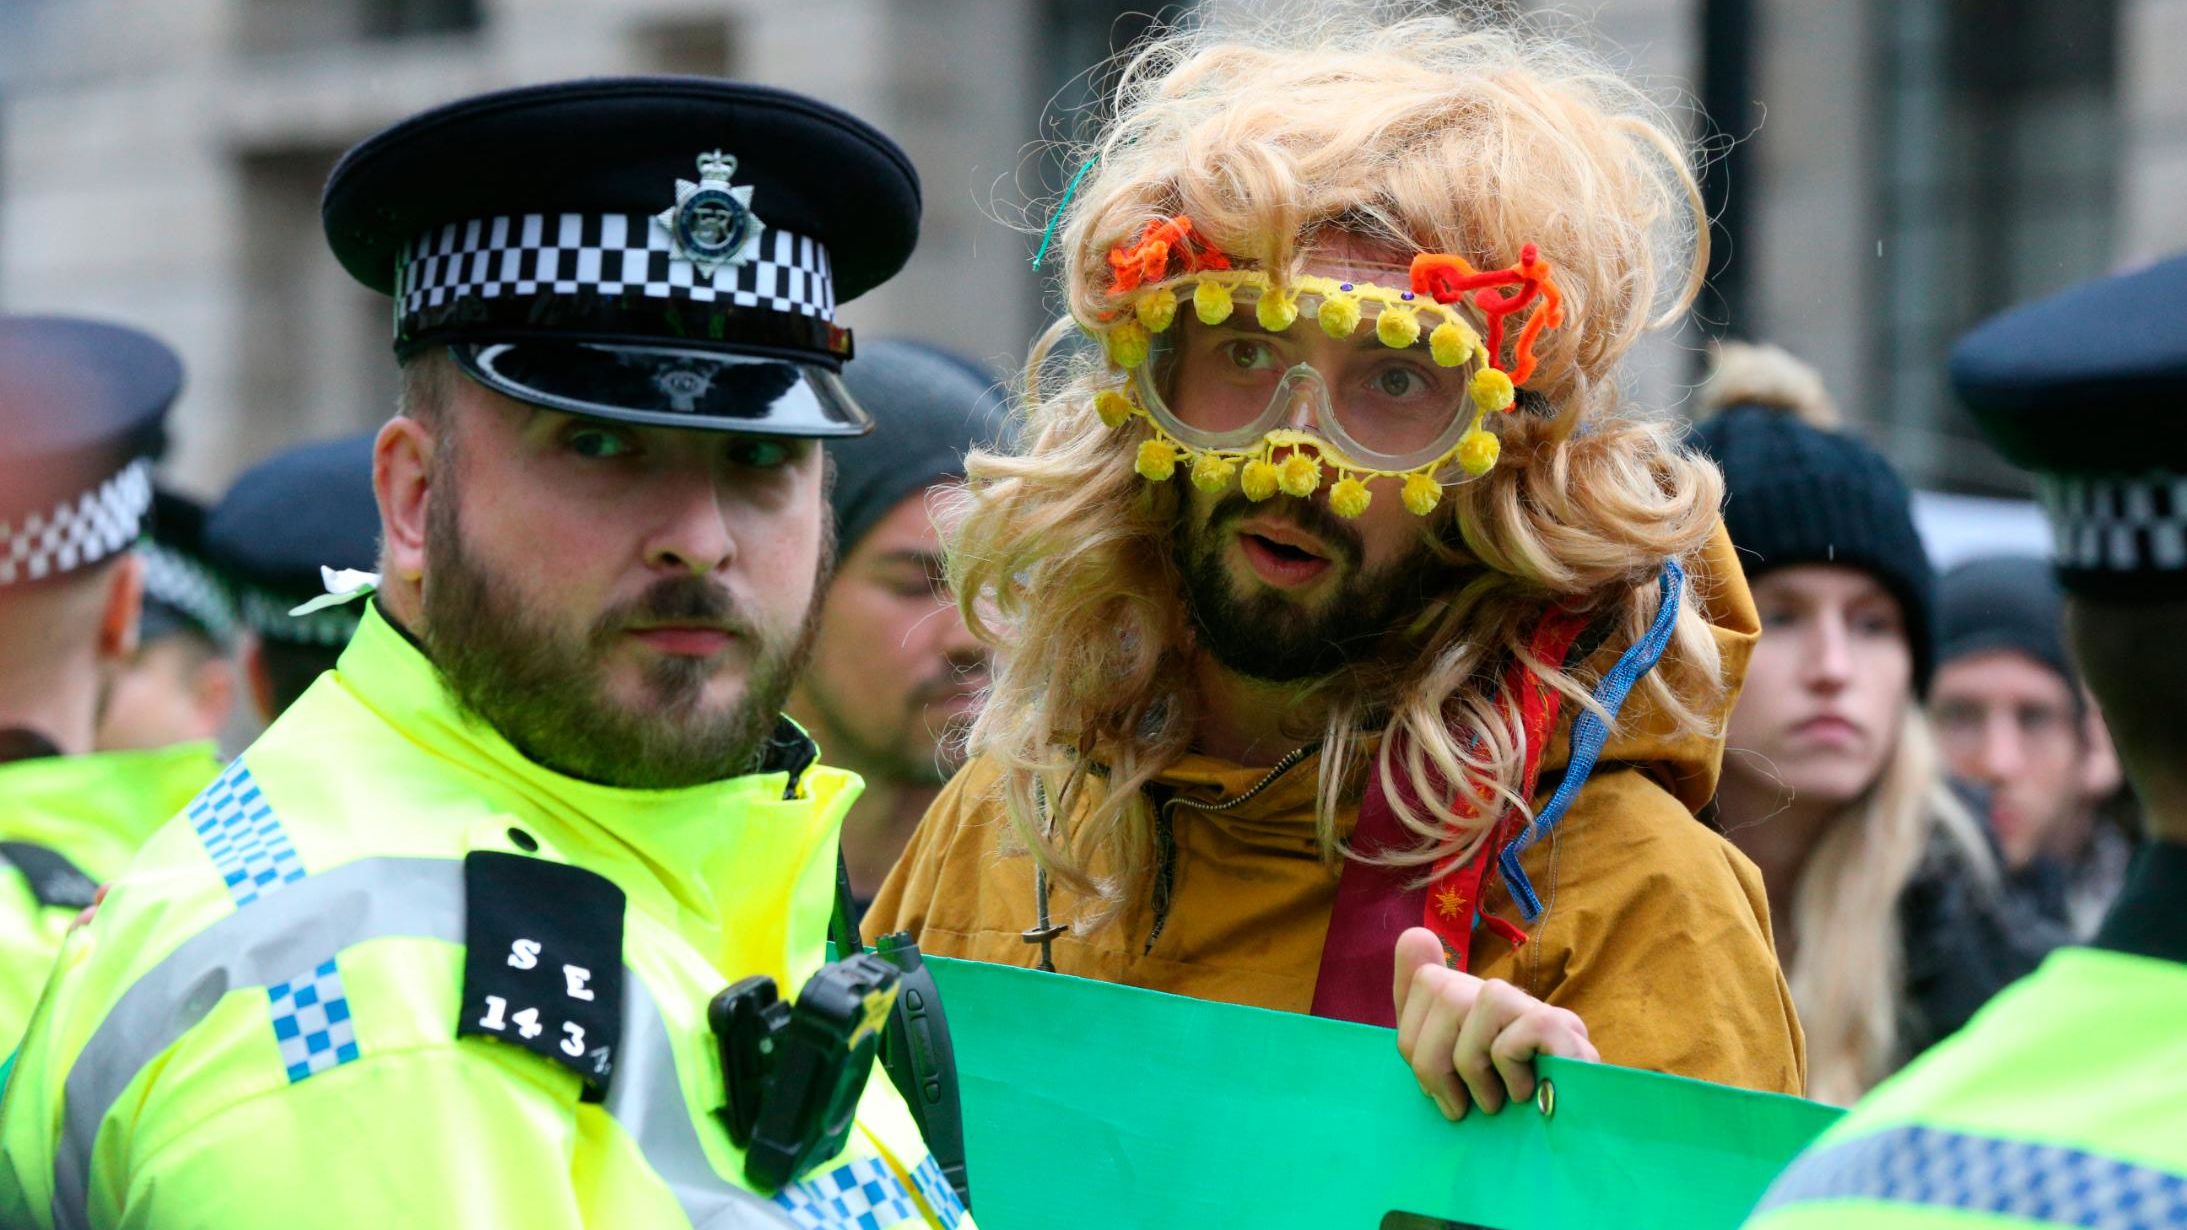 A protester stands near a policeman during a demonstration in London.